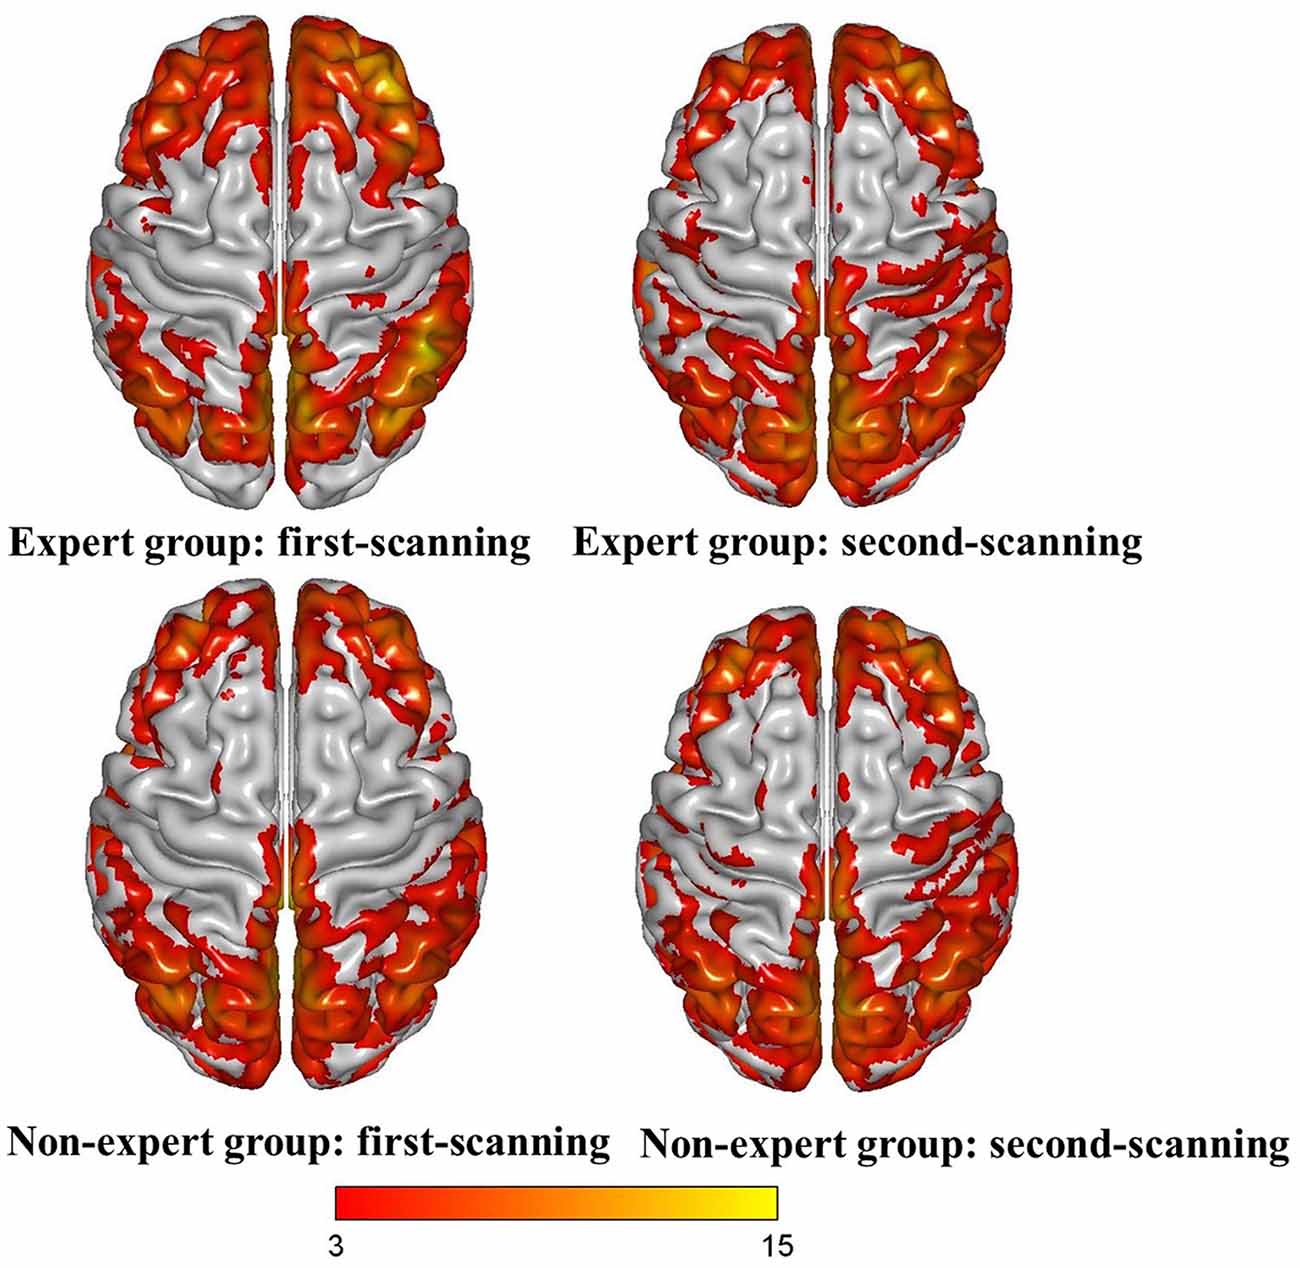 Frontiers  A Reduction in Video Gaming Time Produced a Decrease in Brain  Activity